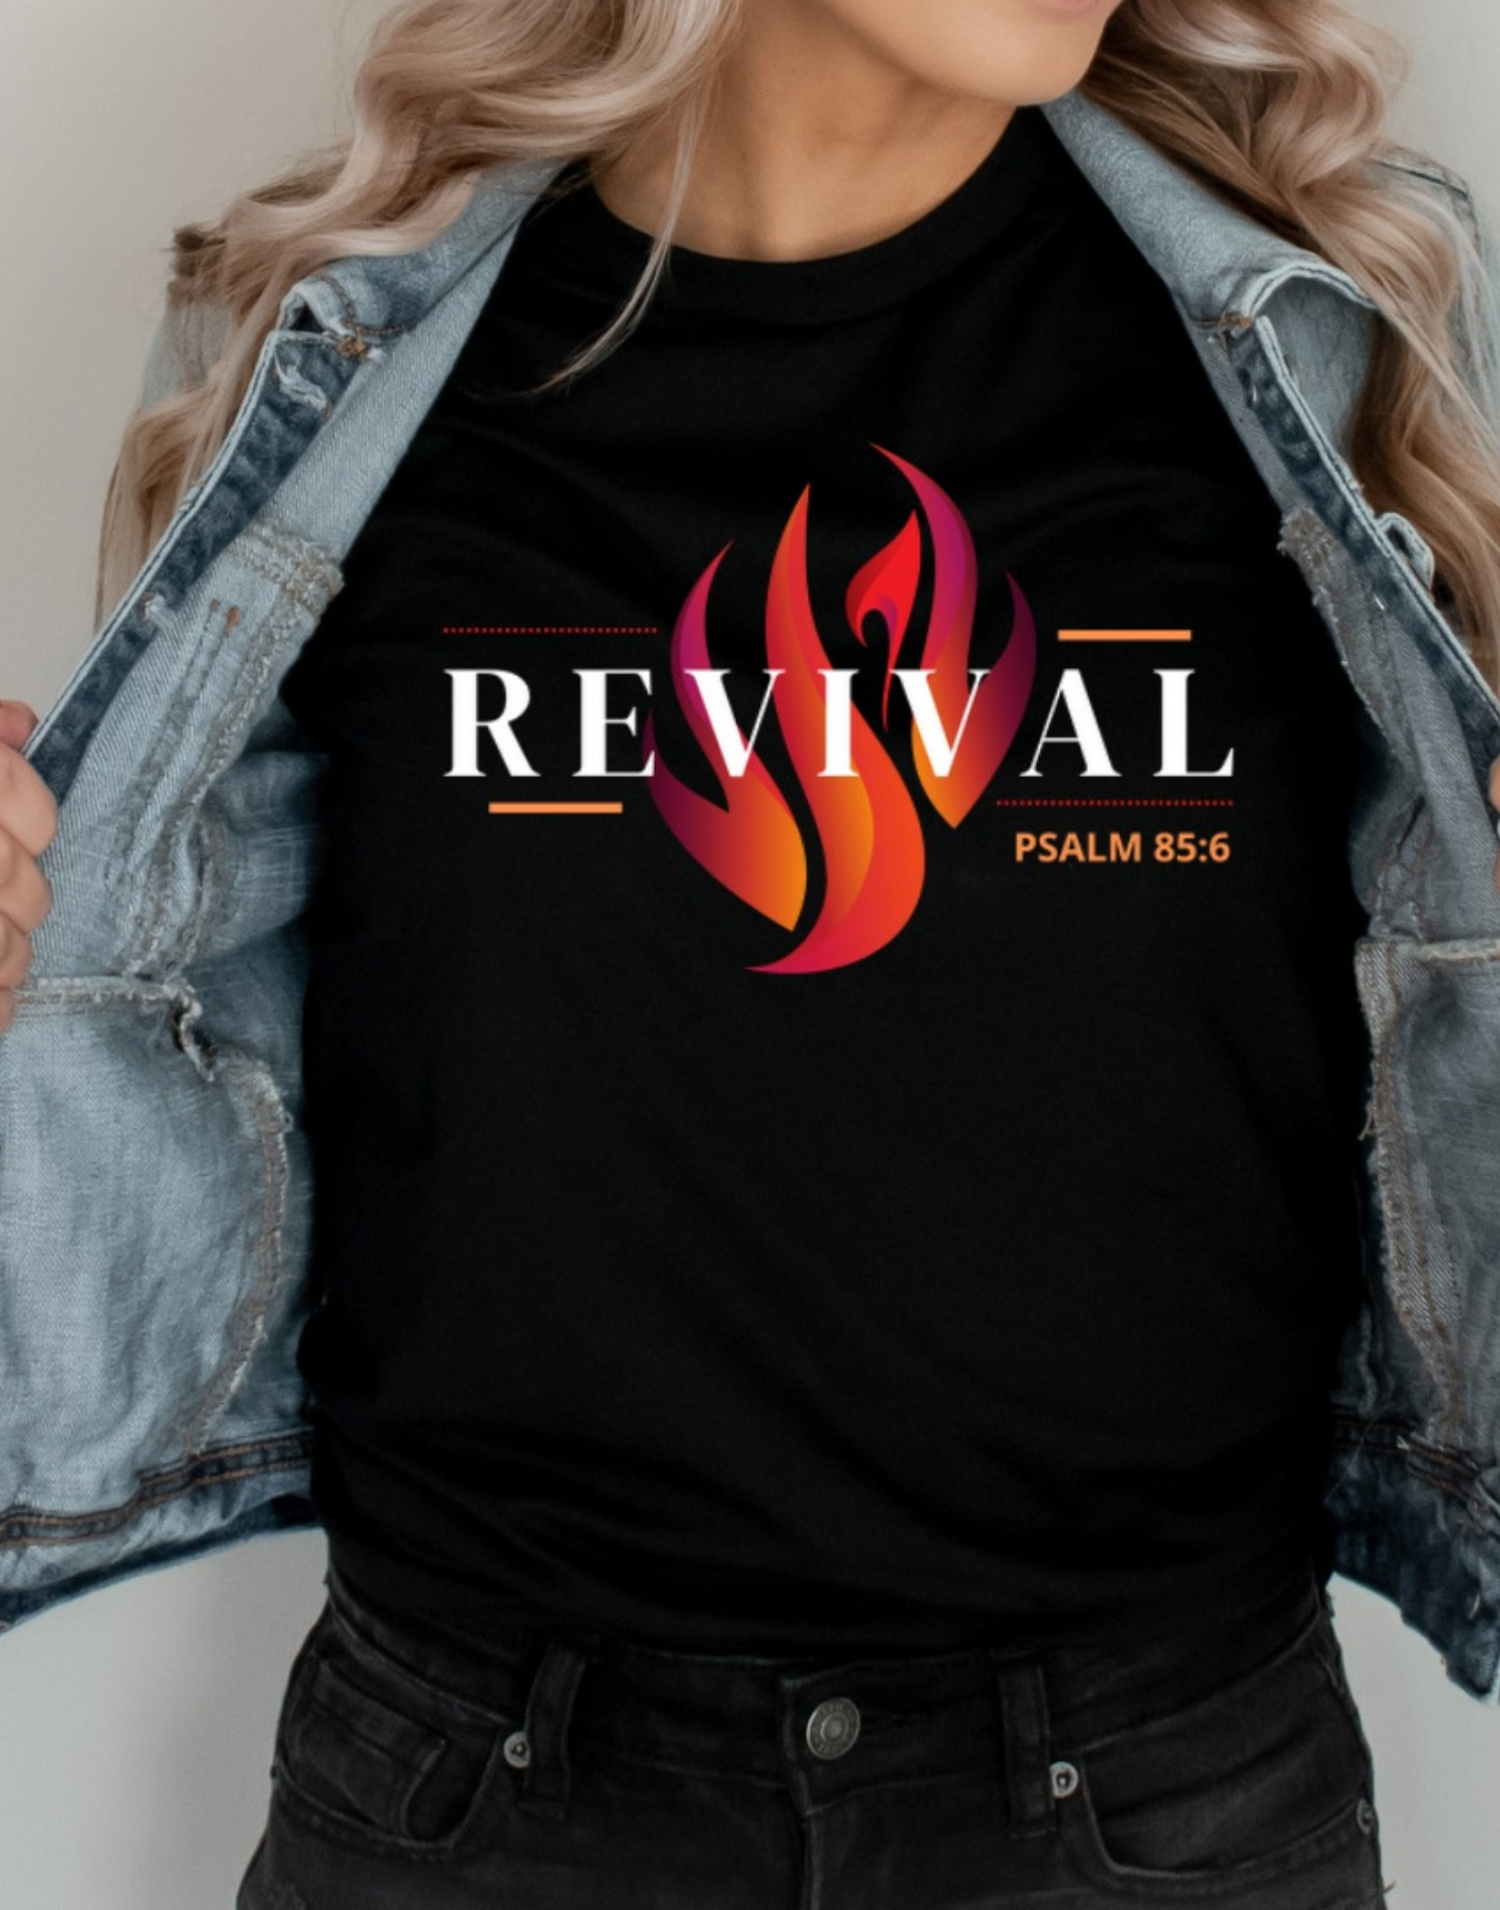 REVIVAL COLLECTION